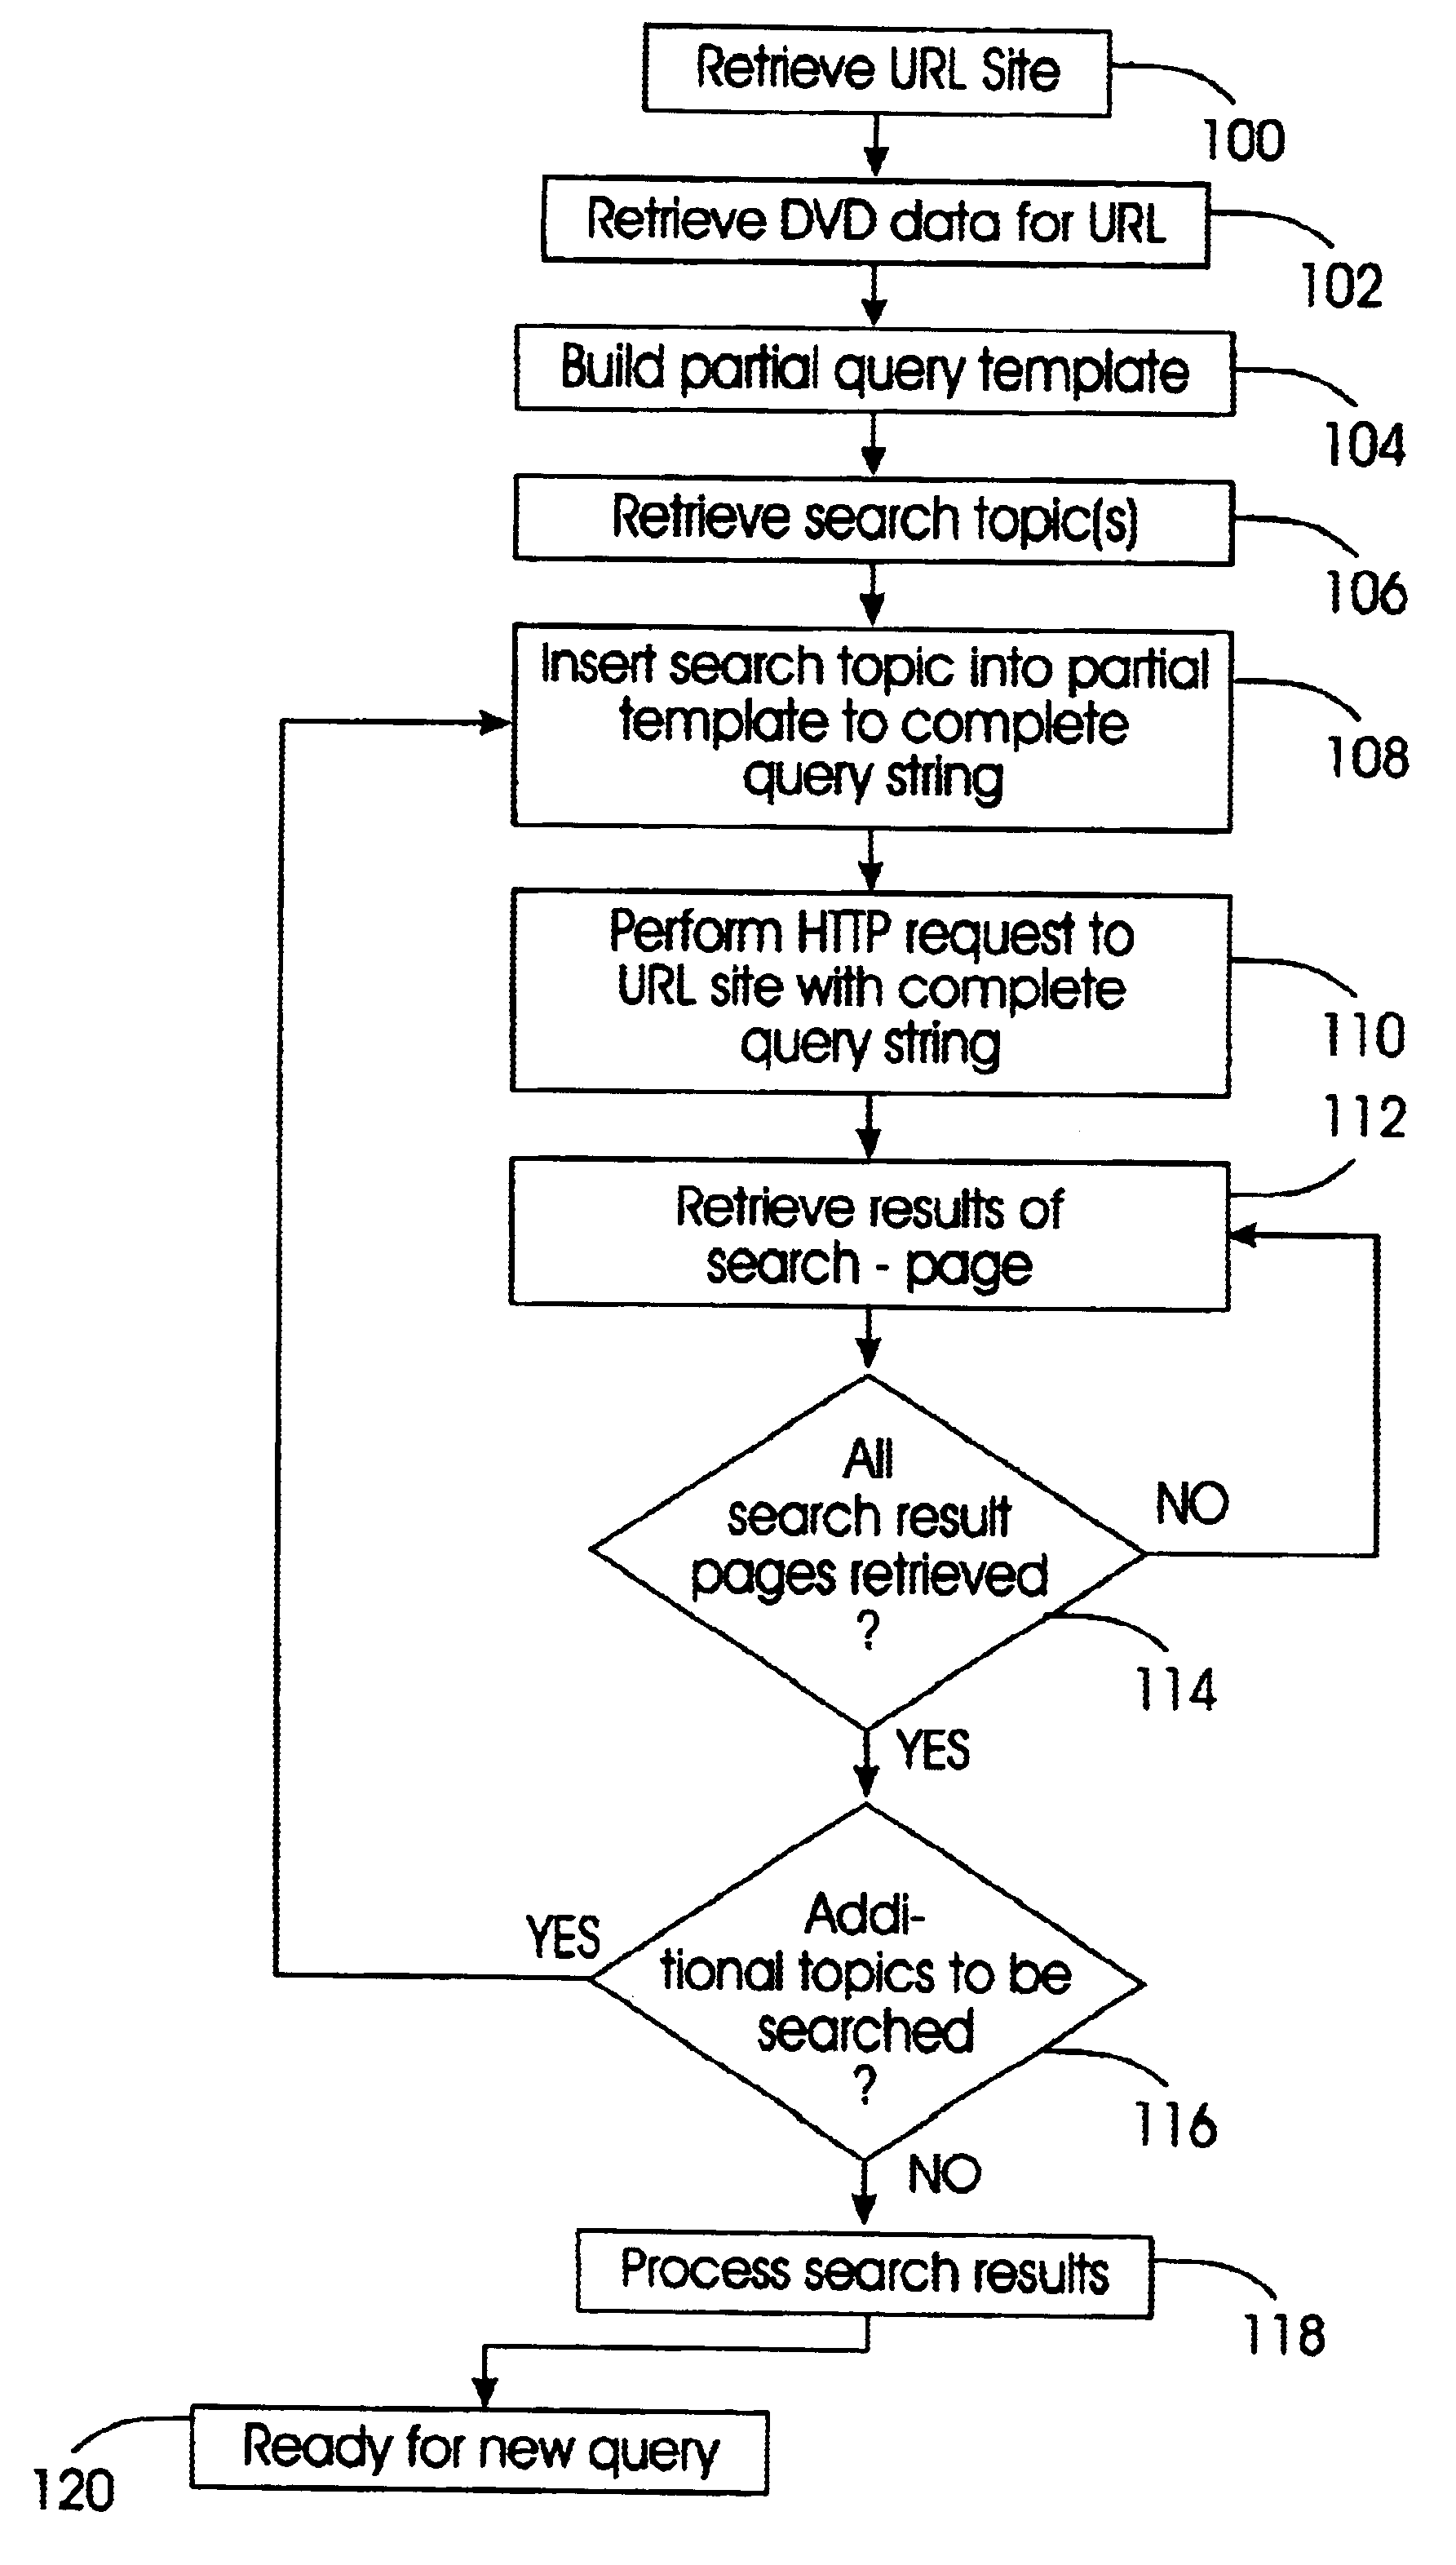 System and method for automatically gathering dynamic content and resources on the world wide web by stimulating user interaction and managing session information